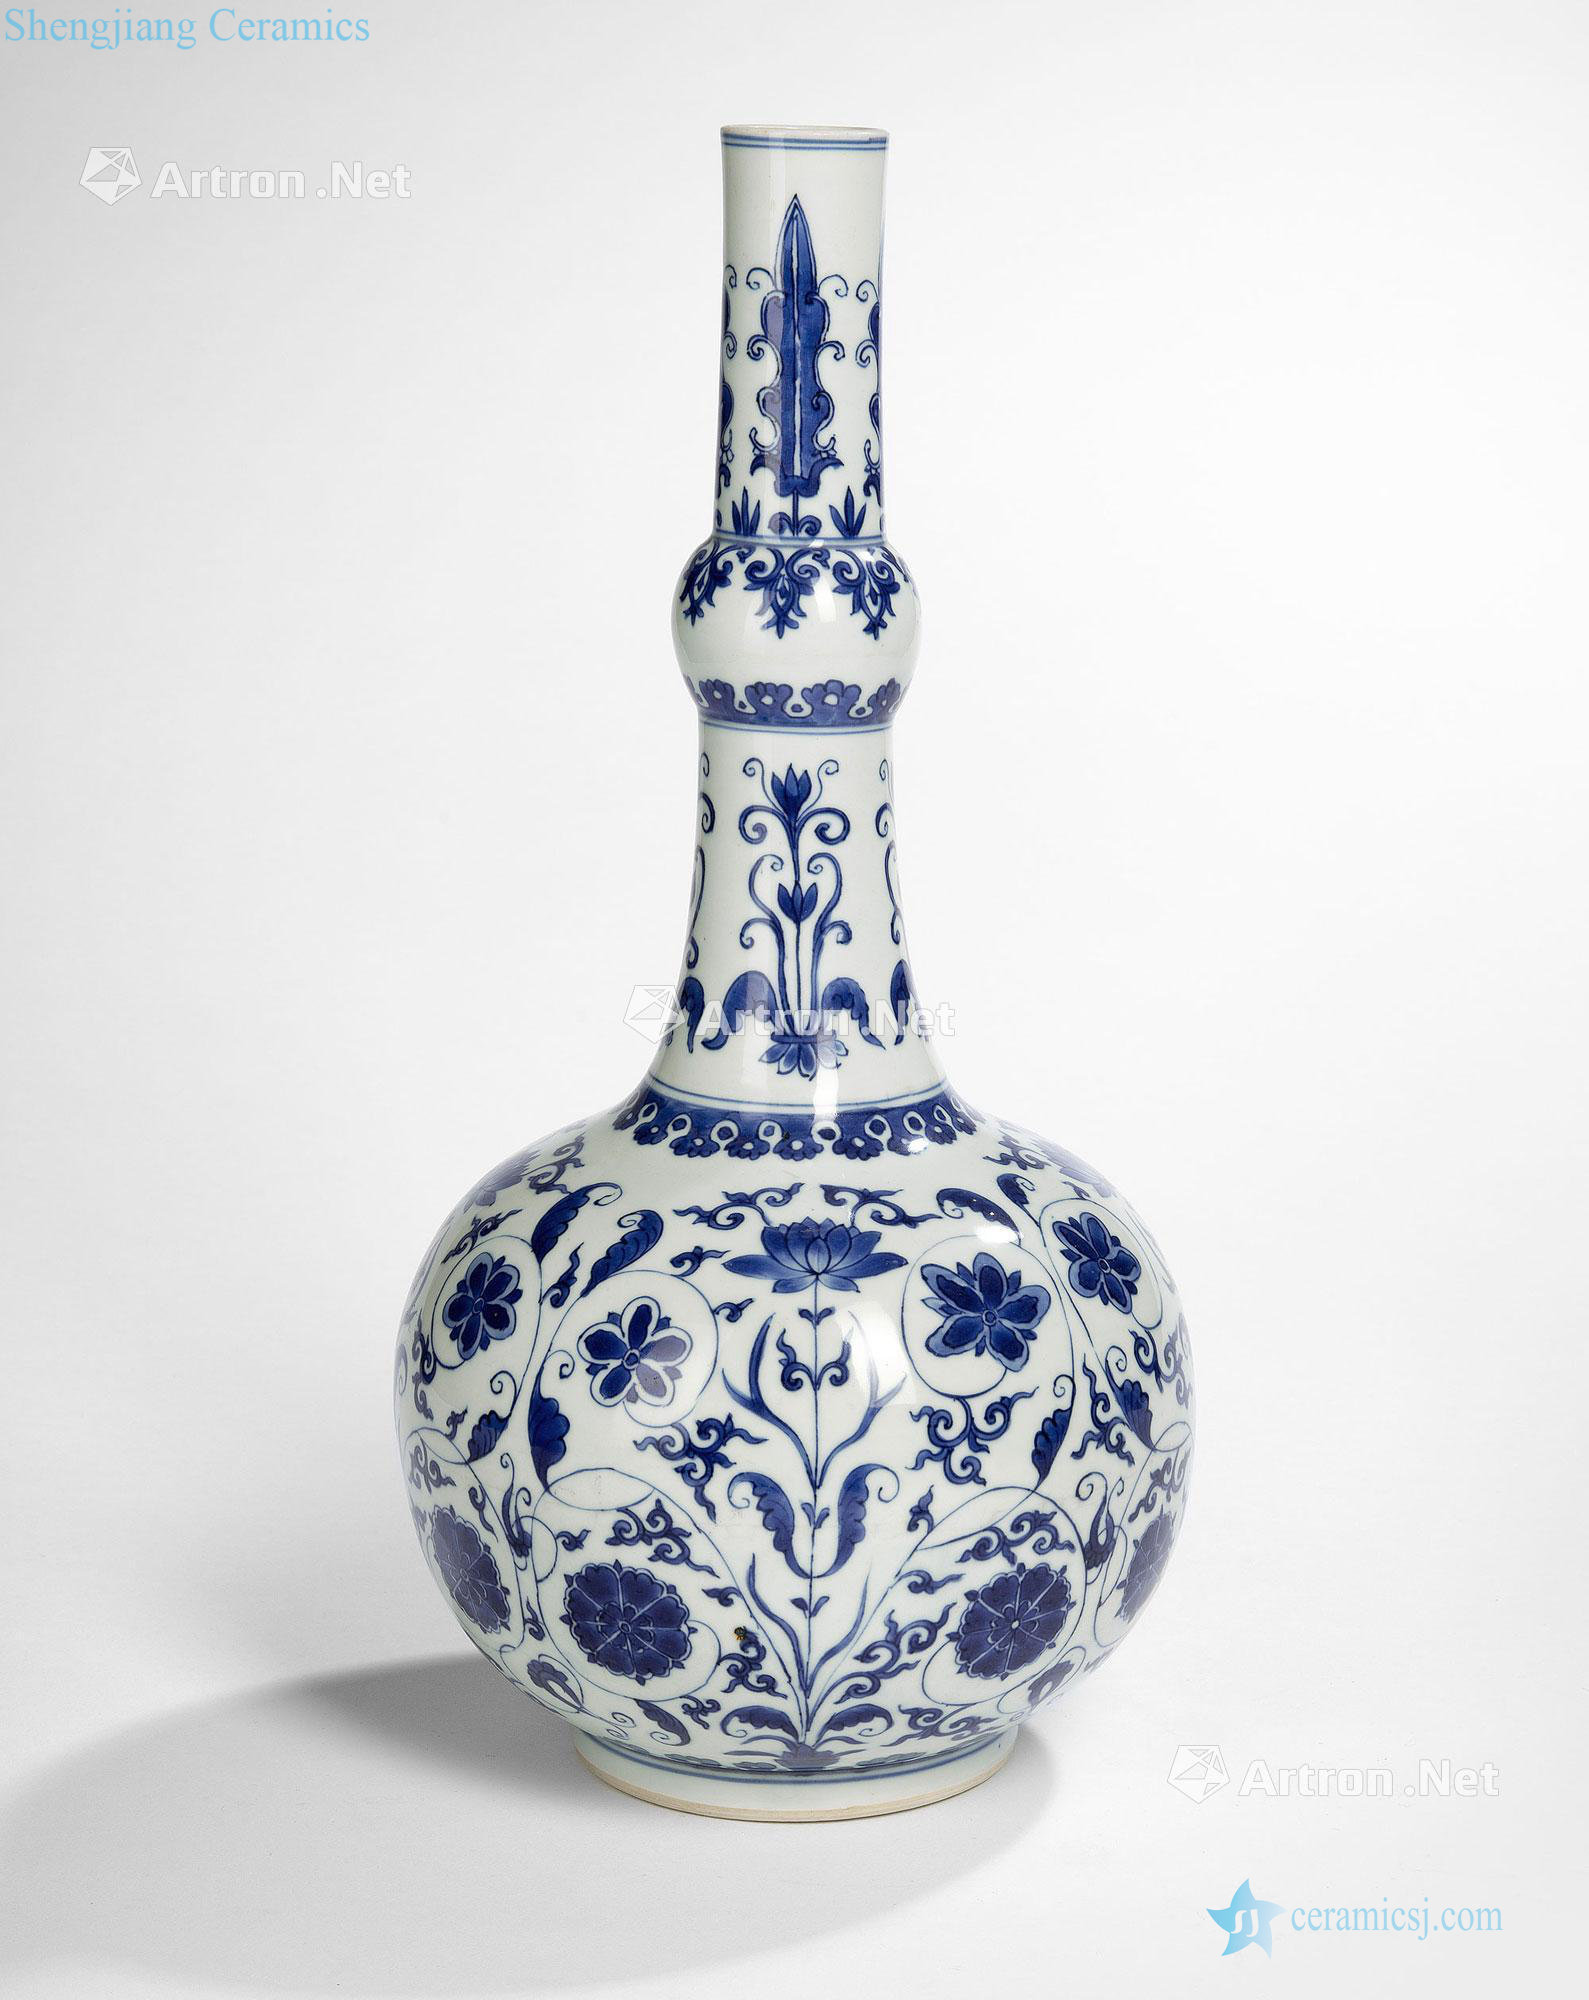 China's transition period/1630-1650 years or so Elegant blue and white flower grain volume branches under the glaze bottle